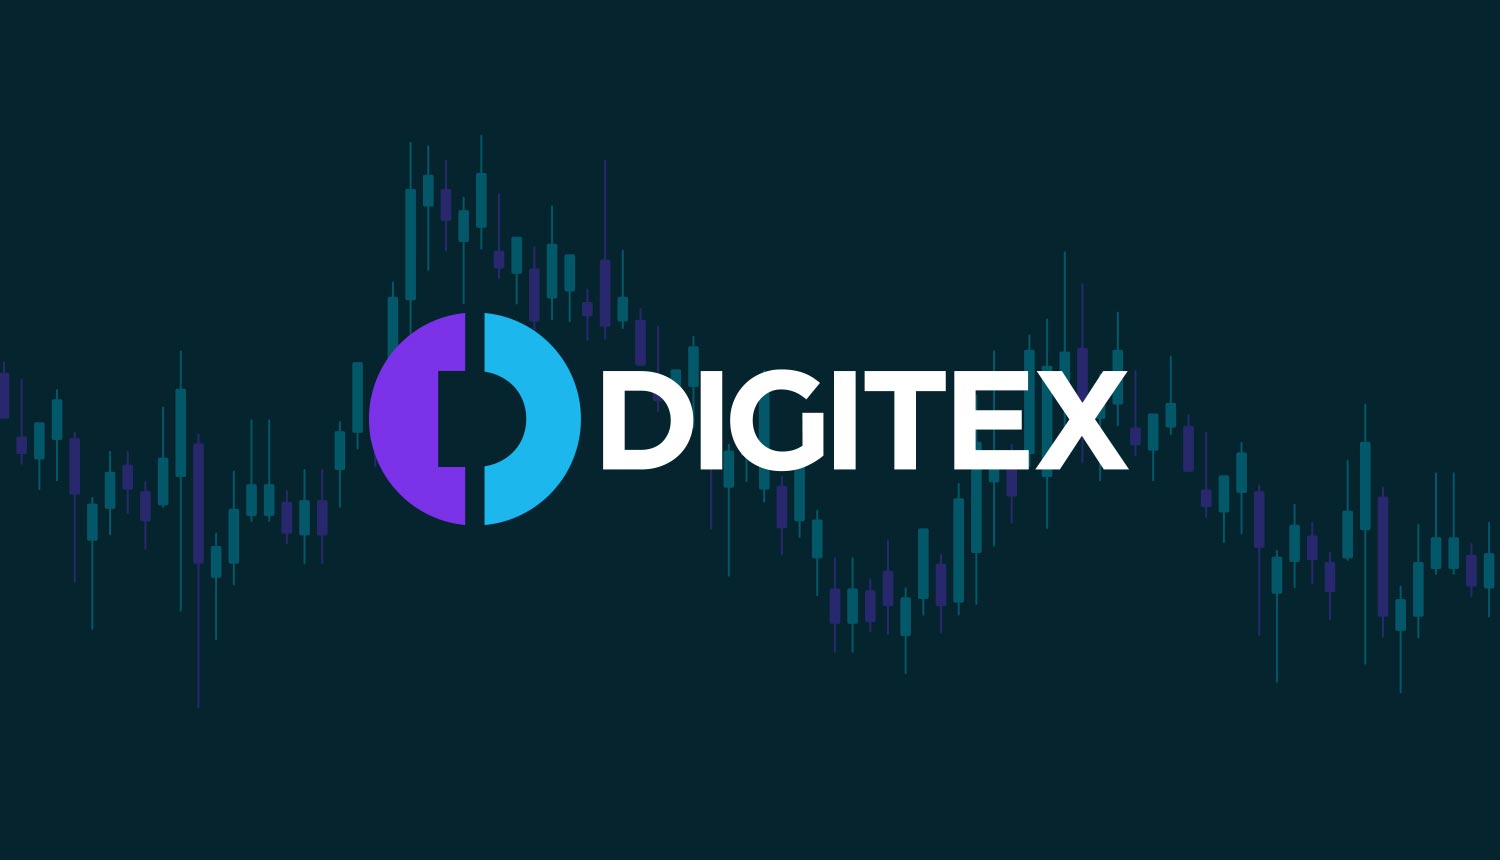 Digitex Futures Price Falls off a Cliff as Losses Pile up